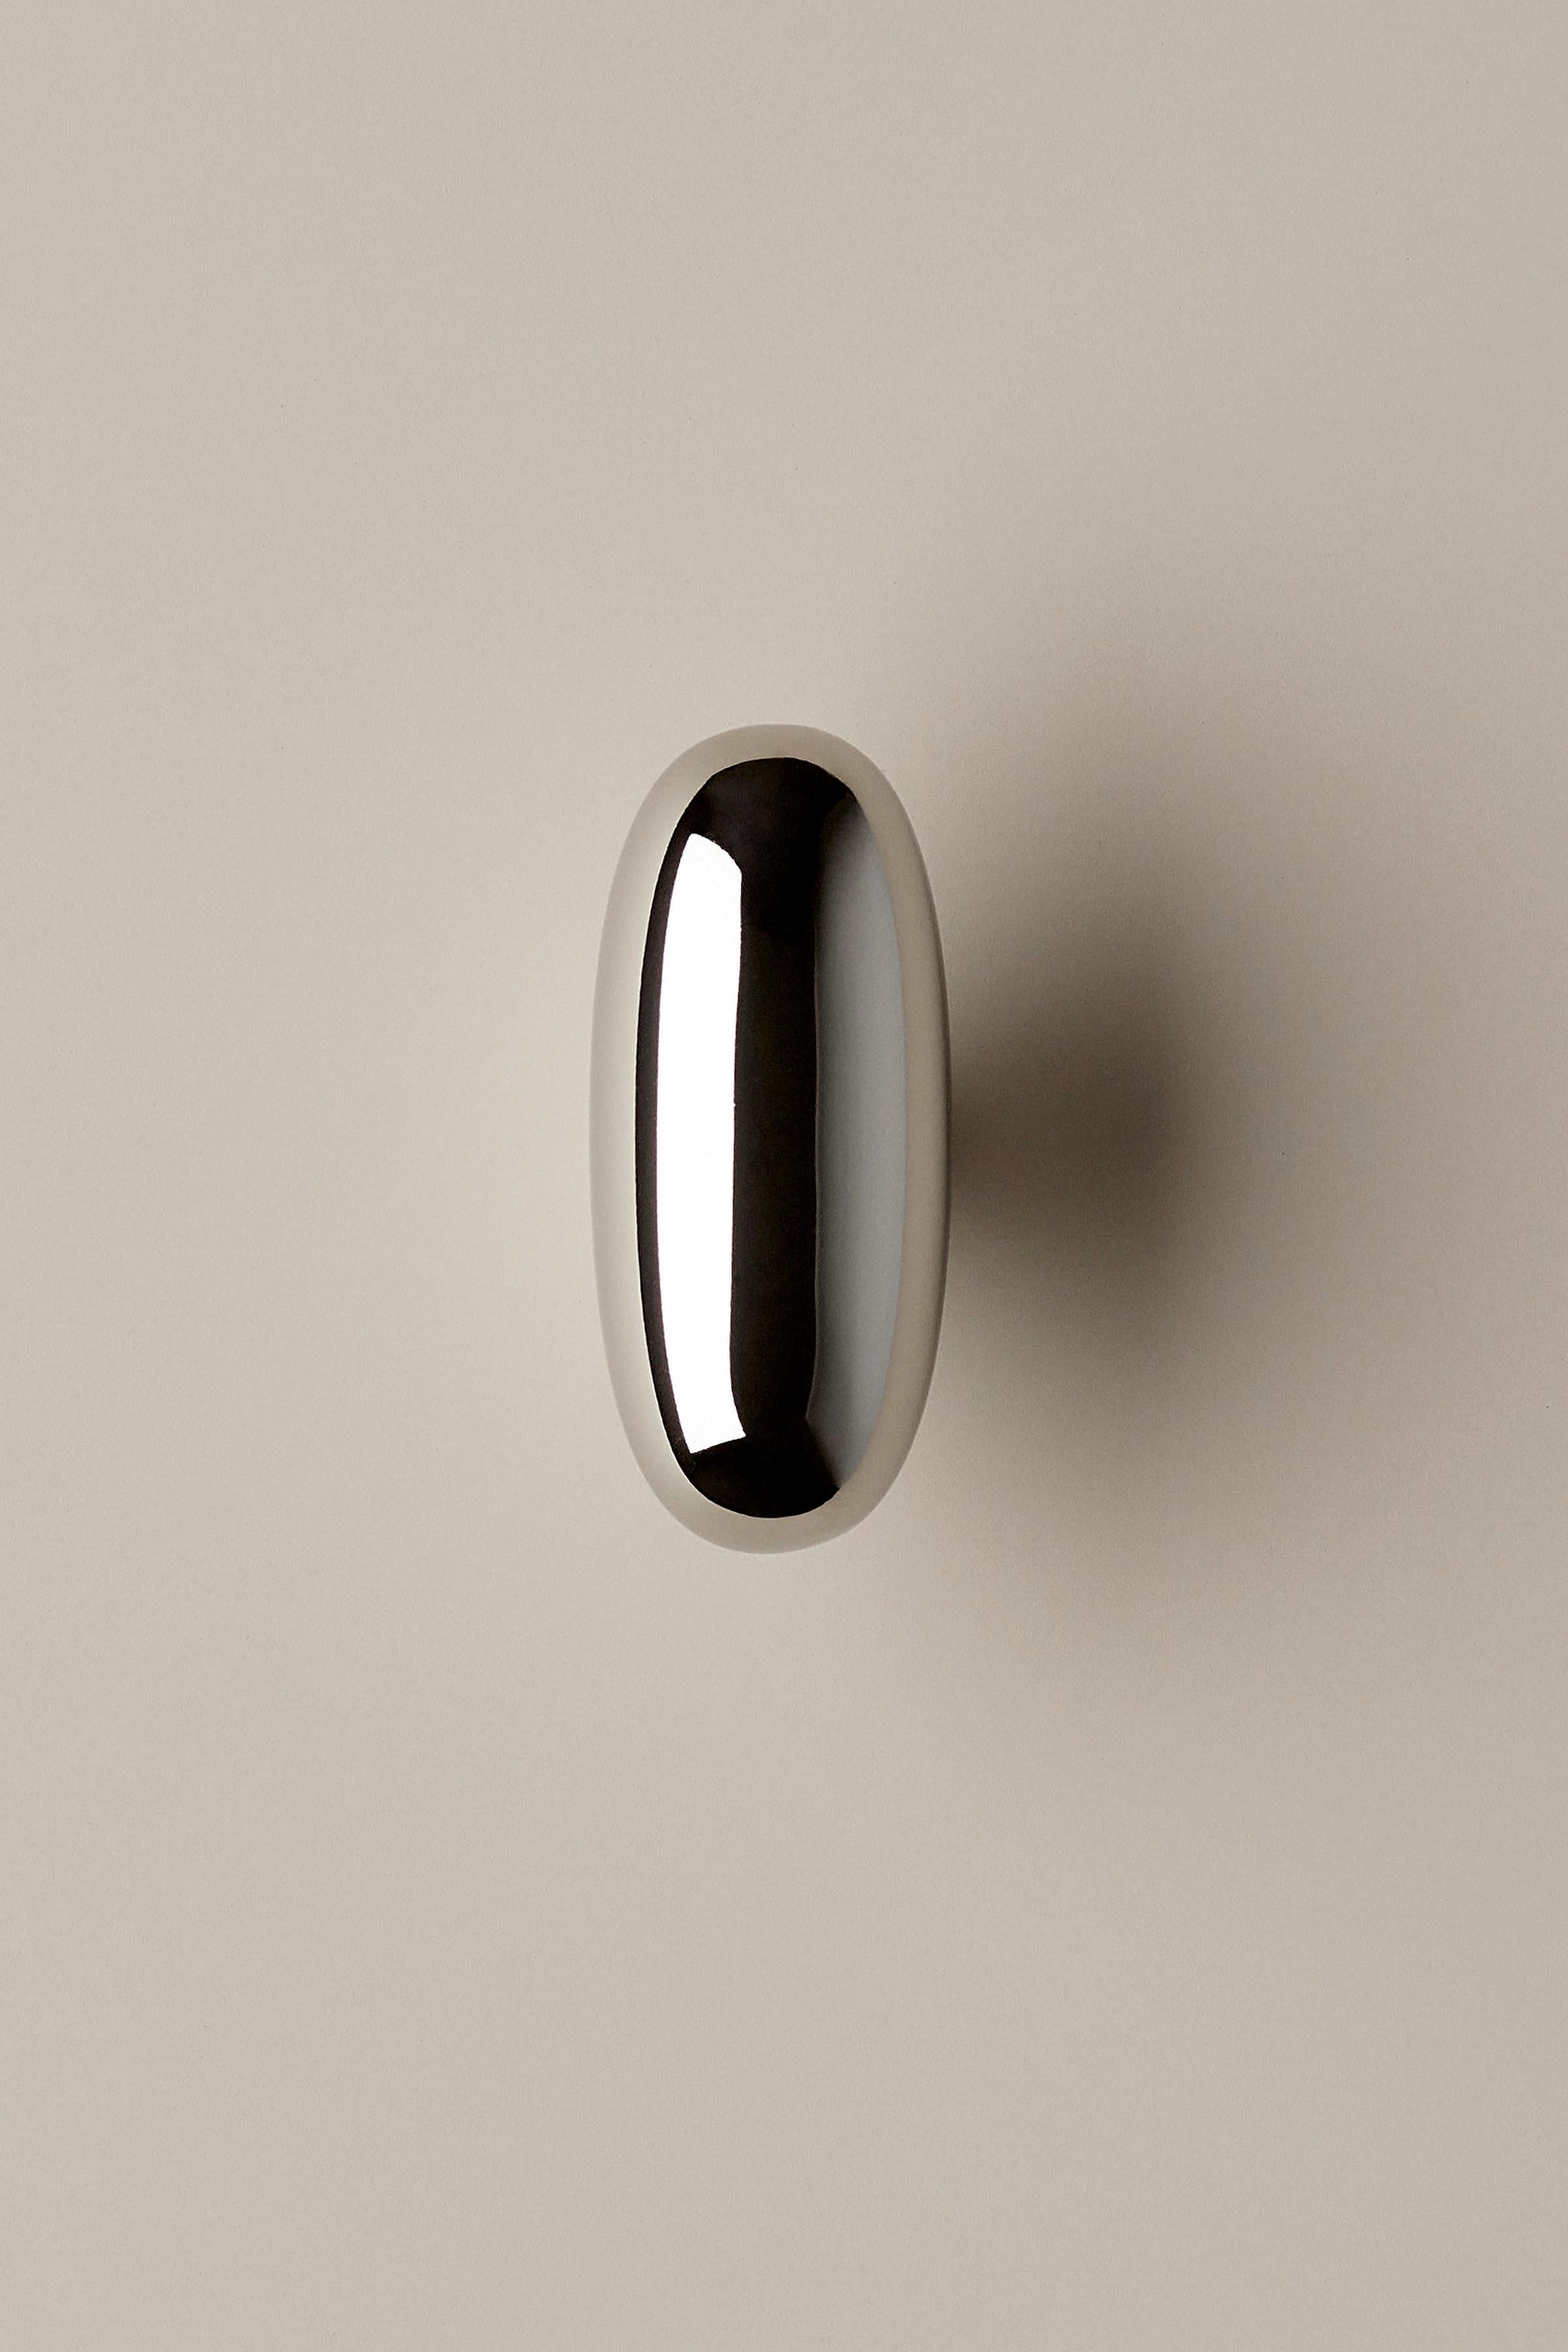 Contemporary Door Handle / Knob 'Blunt' by Spaces Within, Polished Brass For Sale 6